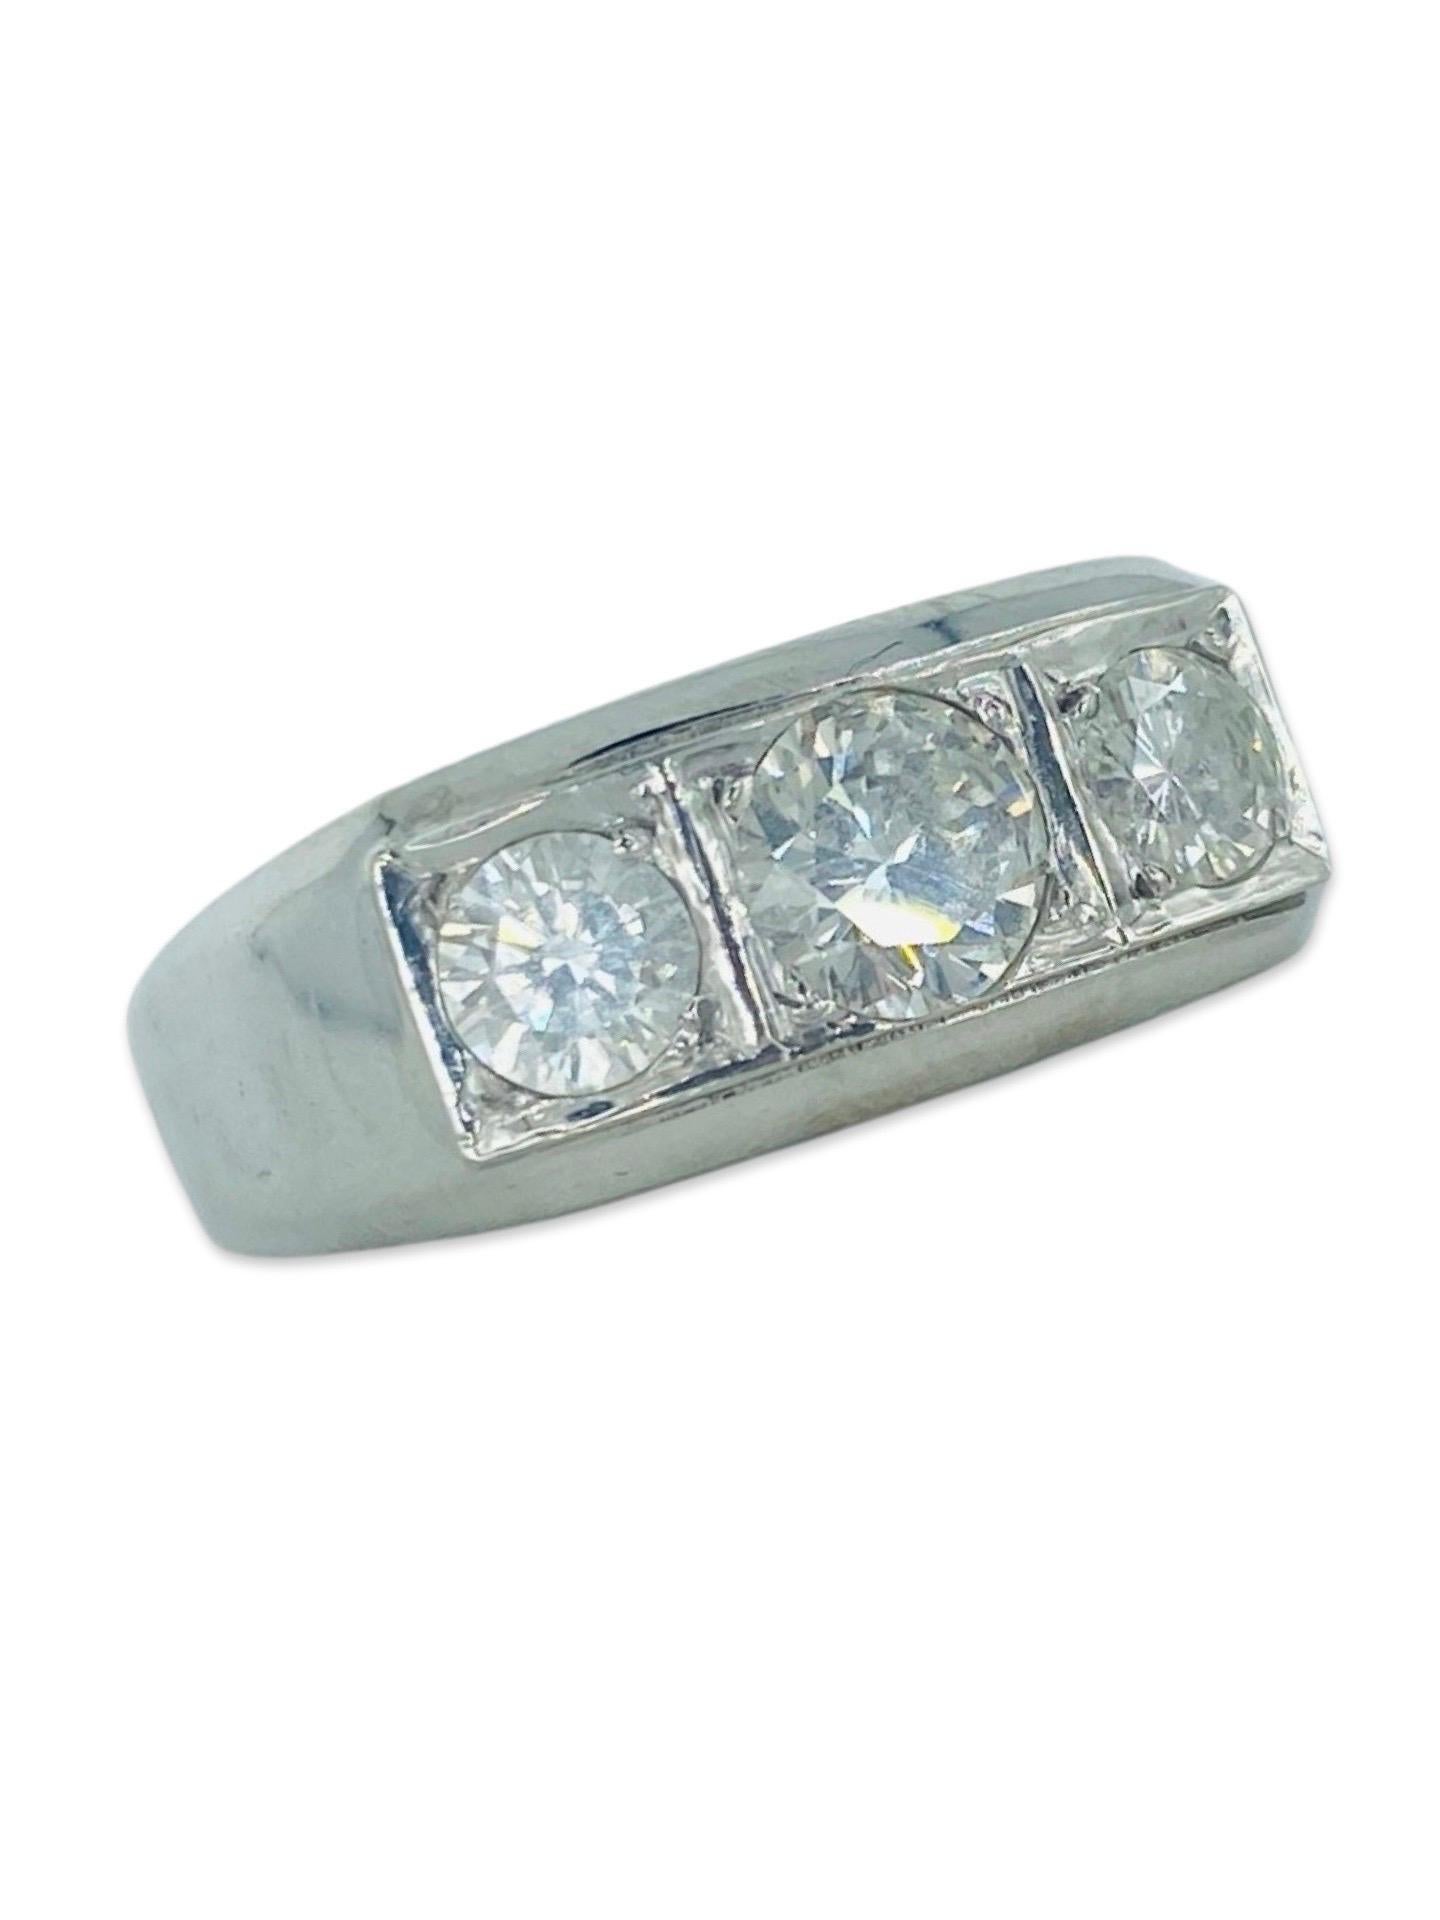 Vintage Men’s 3-Stone 1.50 Carat Diamonds Ring. Center diamond weights approx 0.80ct by formula with sides weighting approx 0.35ct each fit a total of 1.50tcw natural diamonds H/SI
The ring is a size 9
Total weight 6.6g
14k white gold 